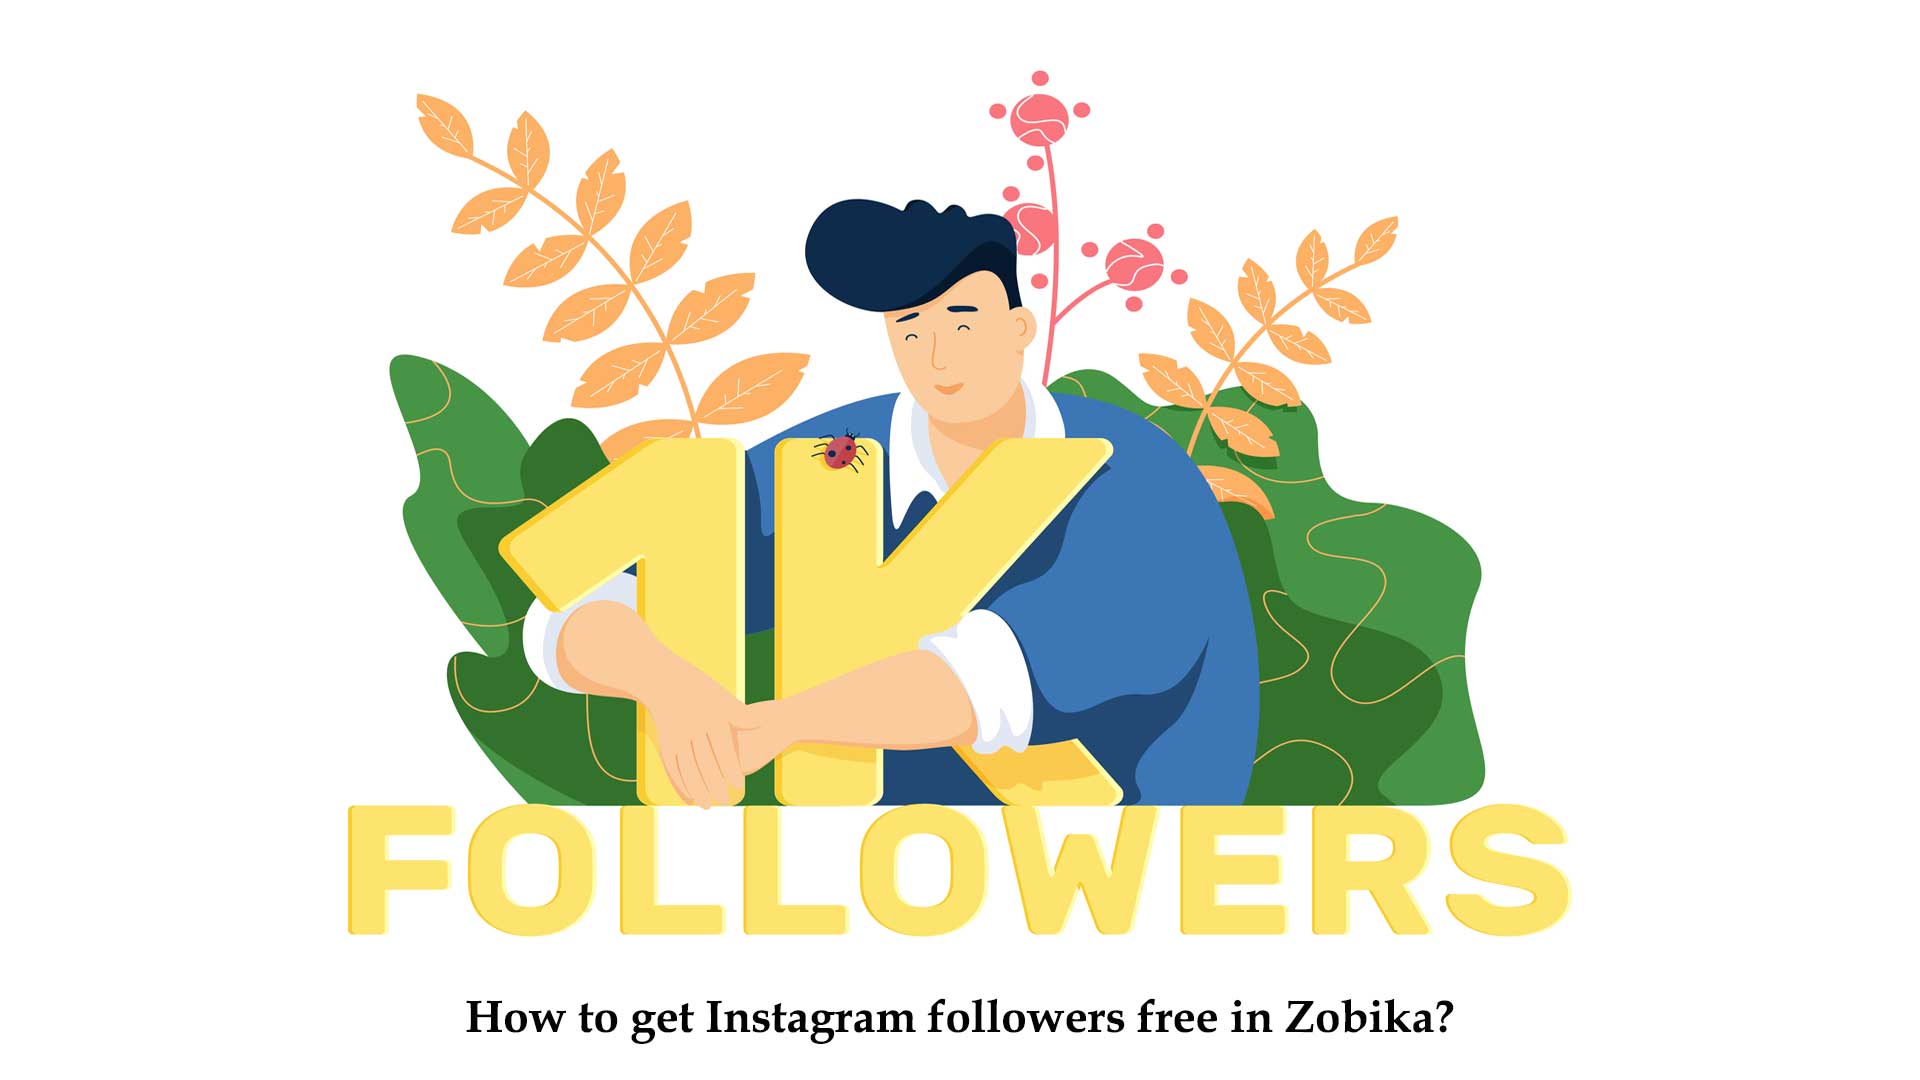 How to get Instagram followers free